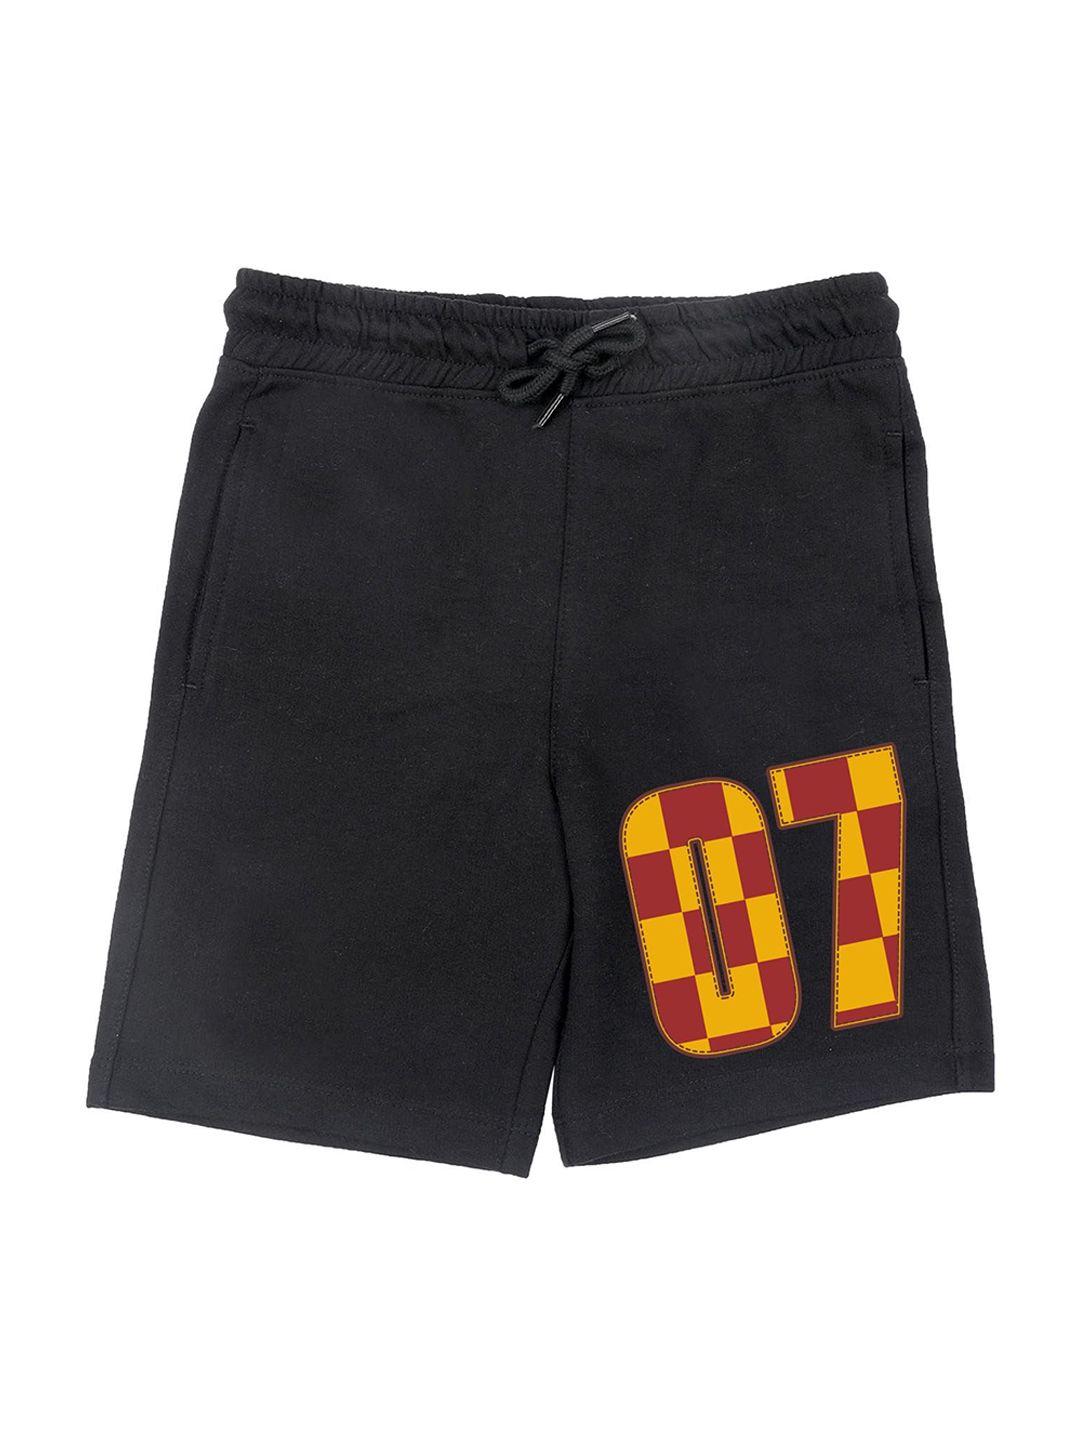 harry potter by wear your mind boys black printed shorts